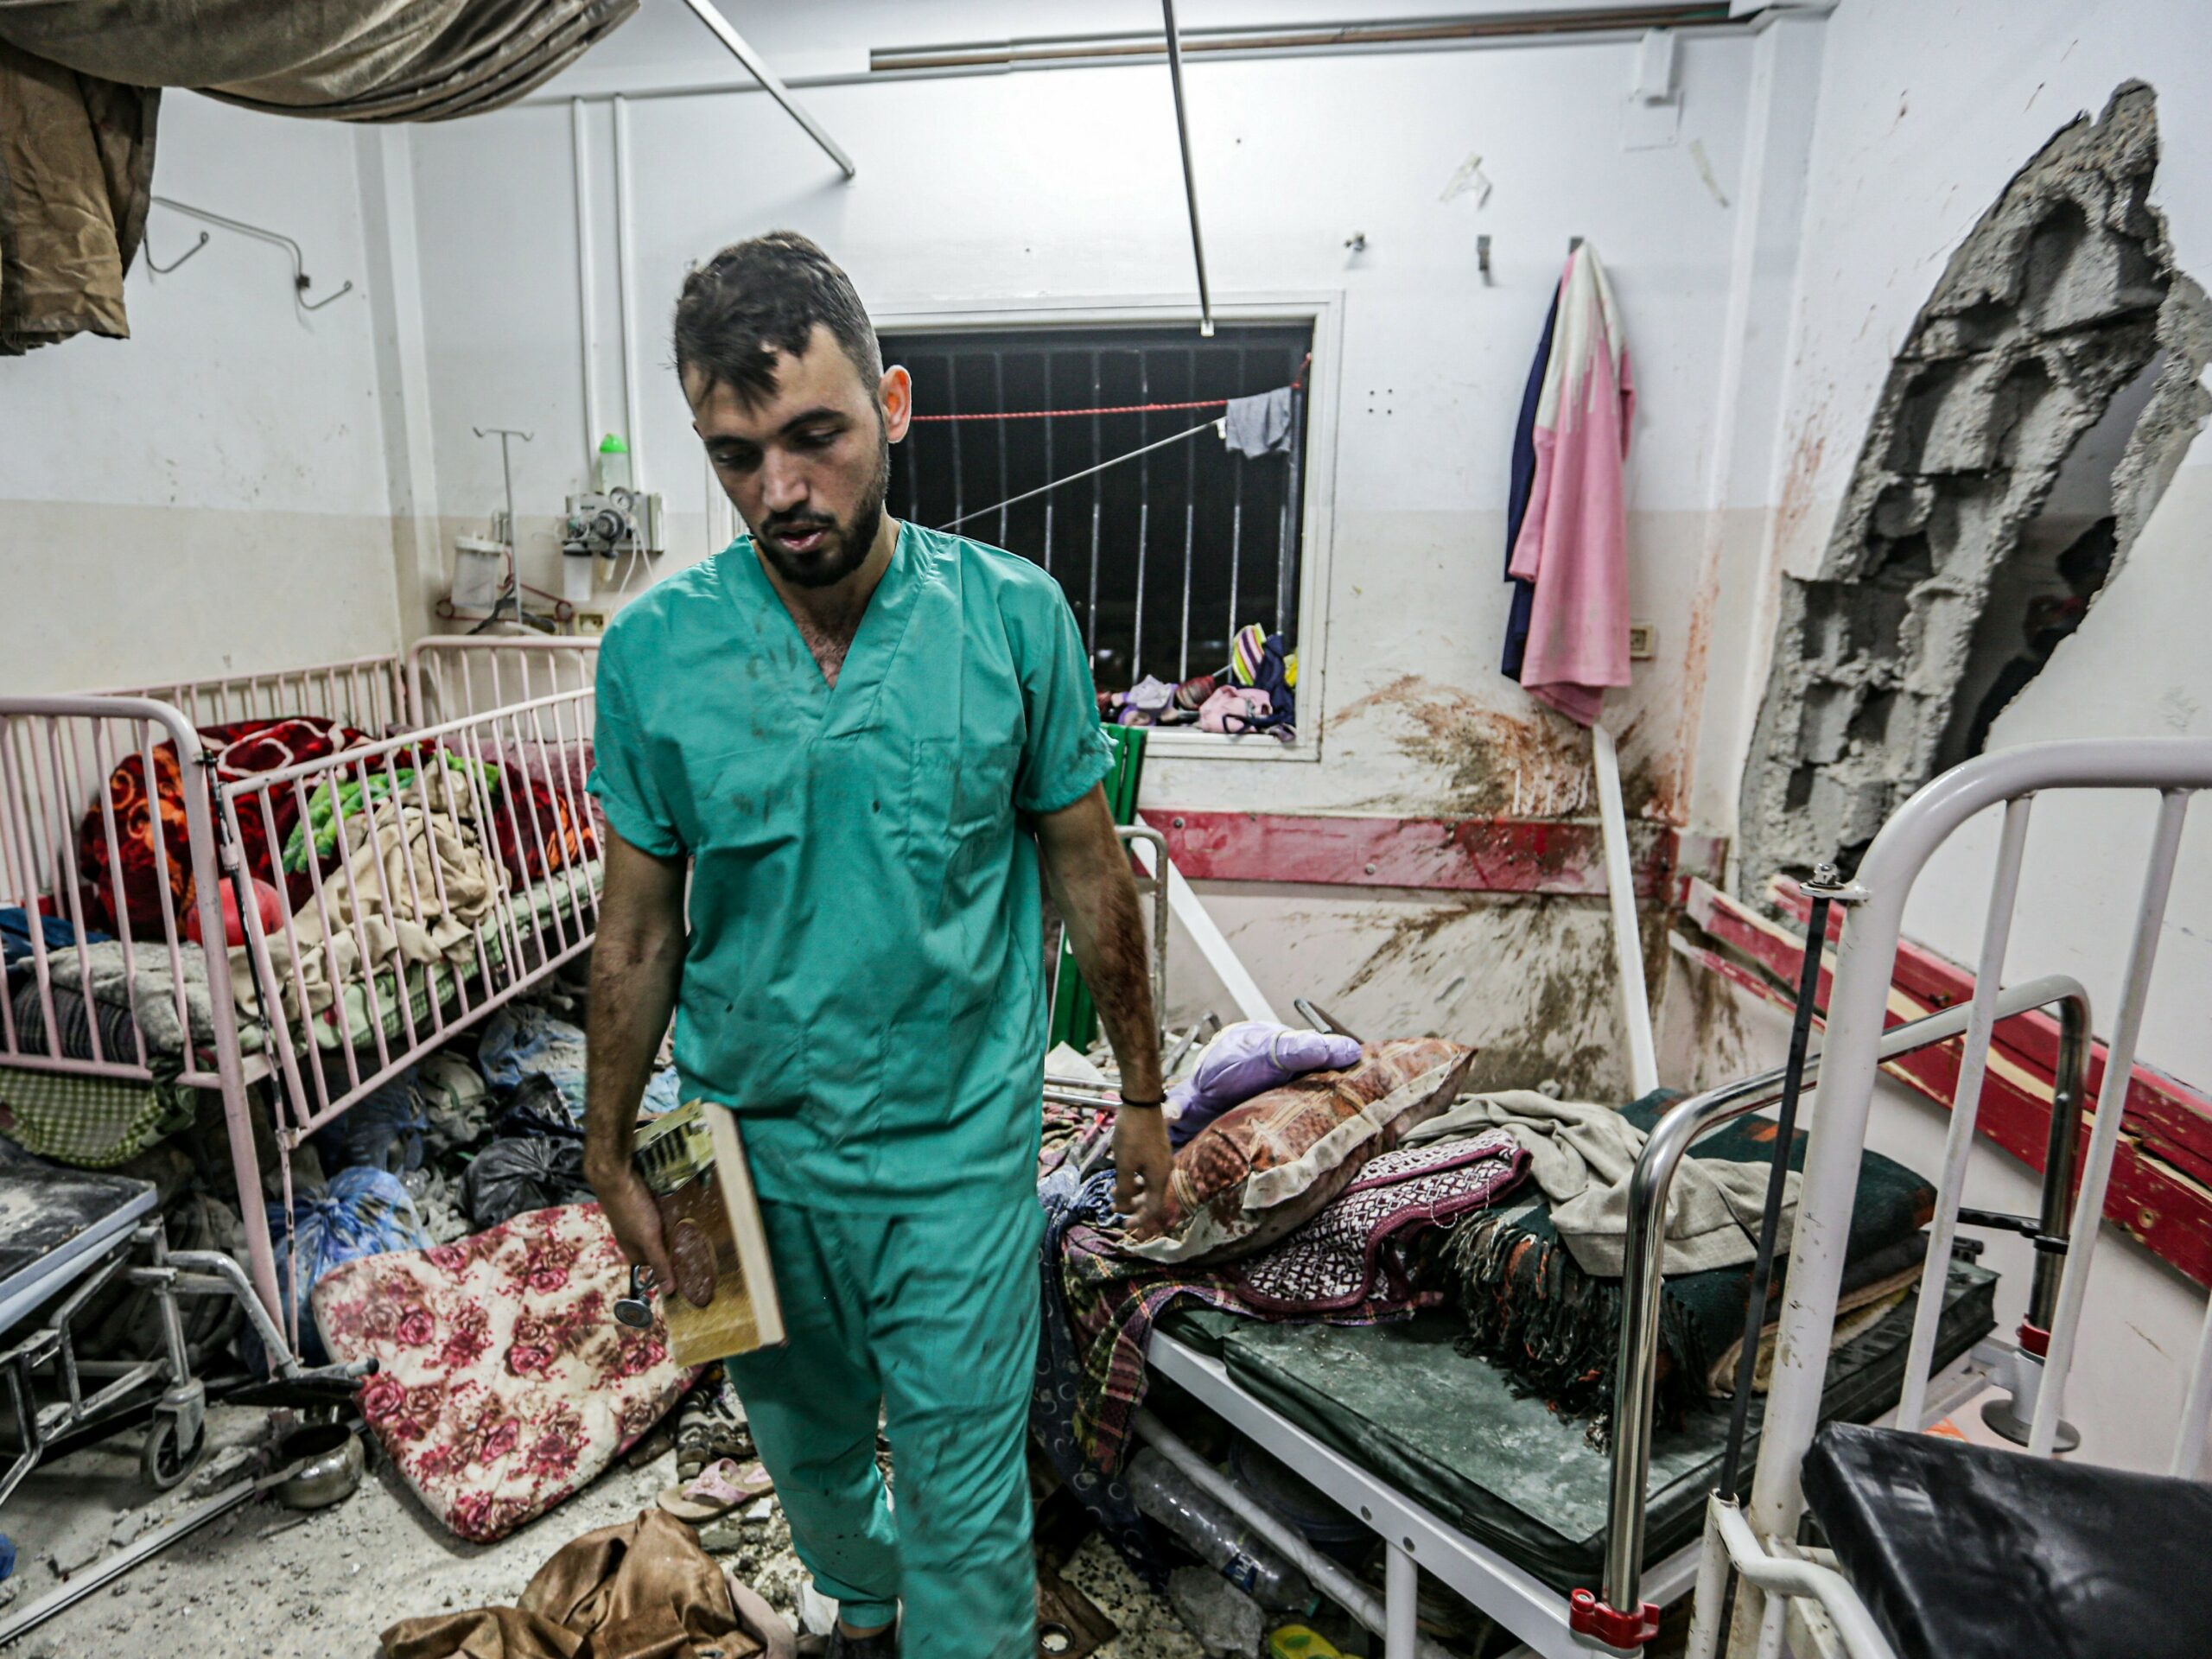 Searching for the remains of hostages, Israeli forces raid another Gaza hospital